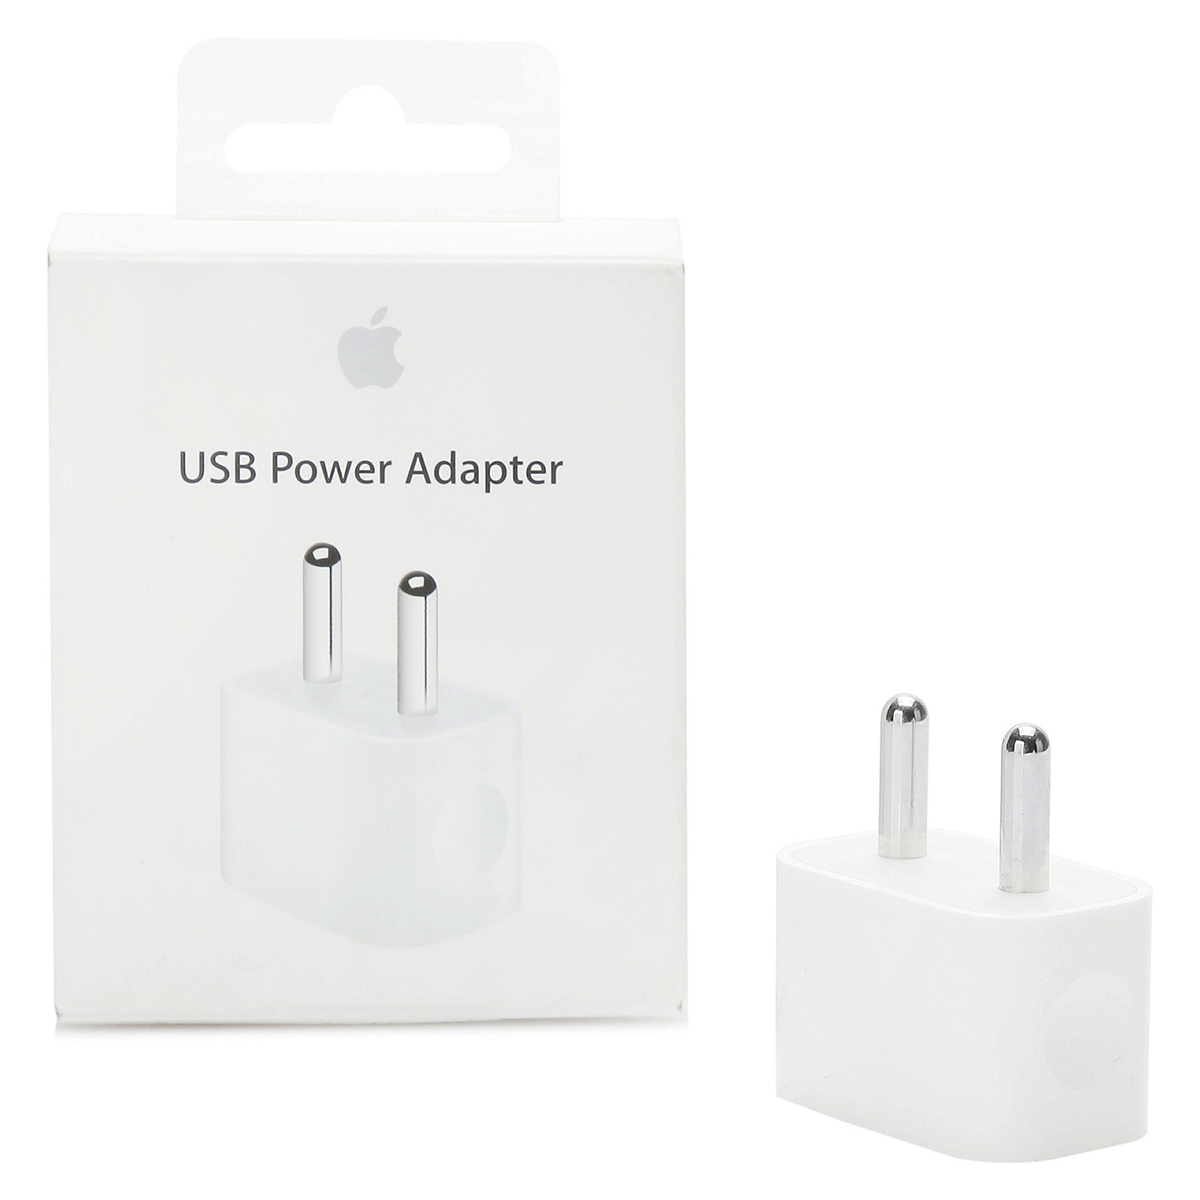 Apple iPhone 7 Plus 5W USB Power Adapter Mobile Charging Adapter